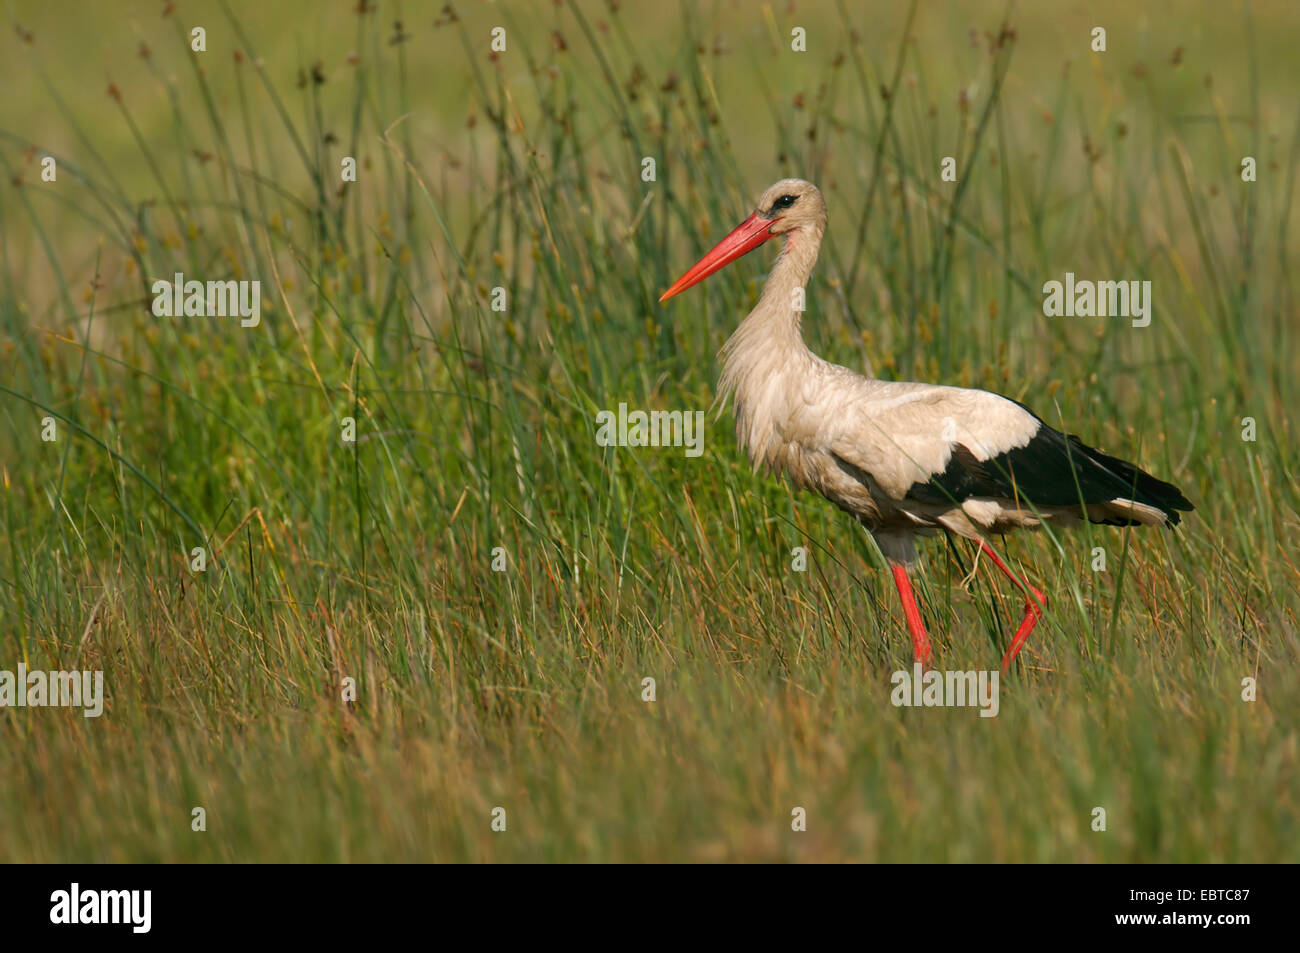 white stork (Ciconia ciconia), on the feed in a meadow, Hungary, Kiskunsagi, Fuellopszallas Stock Photo